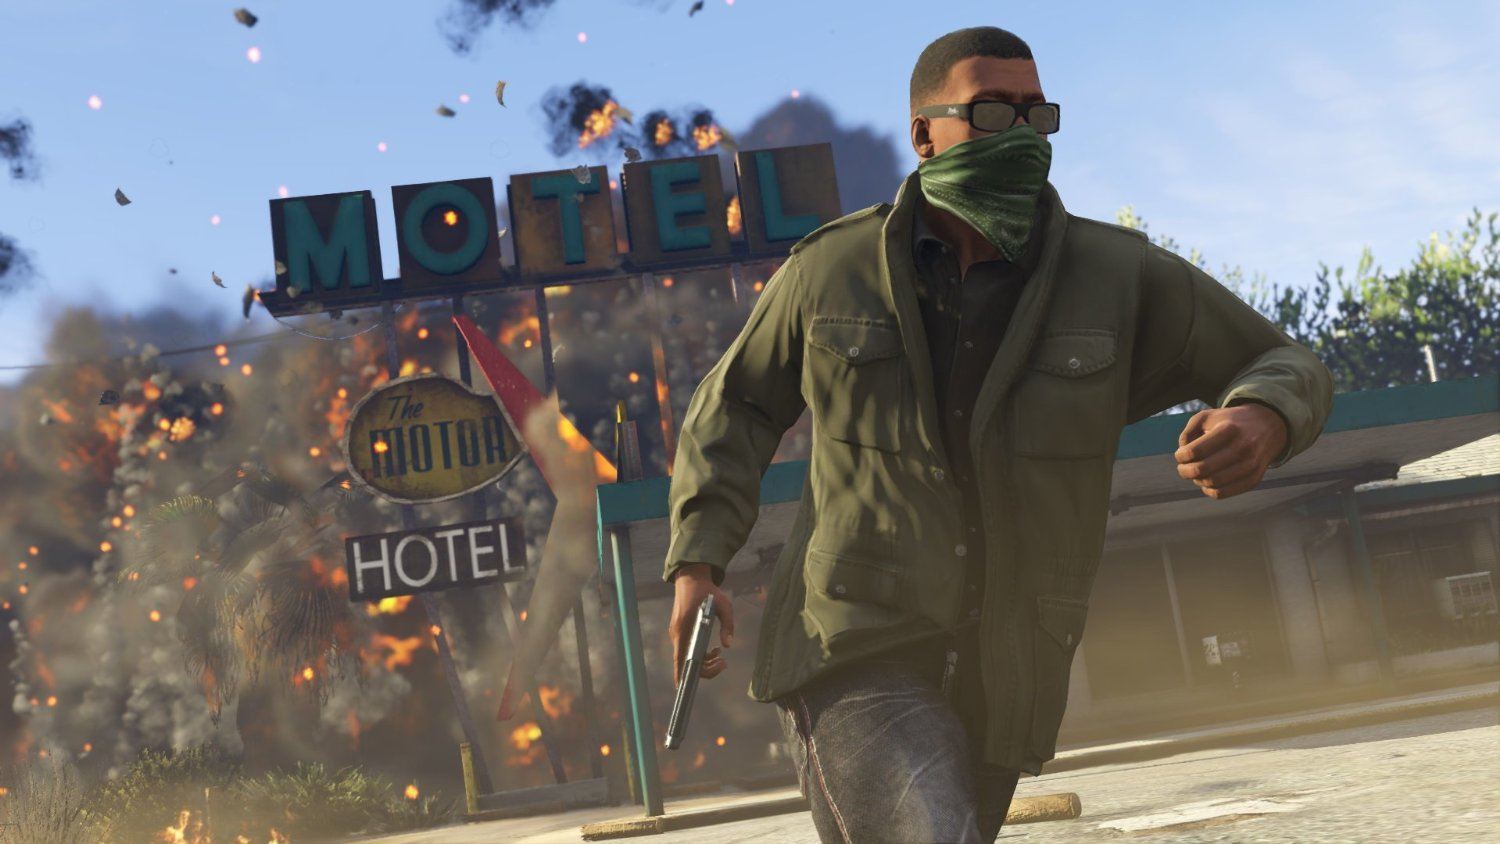 A rumor suggests an early GTA 5 release date.